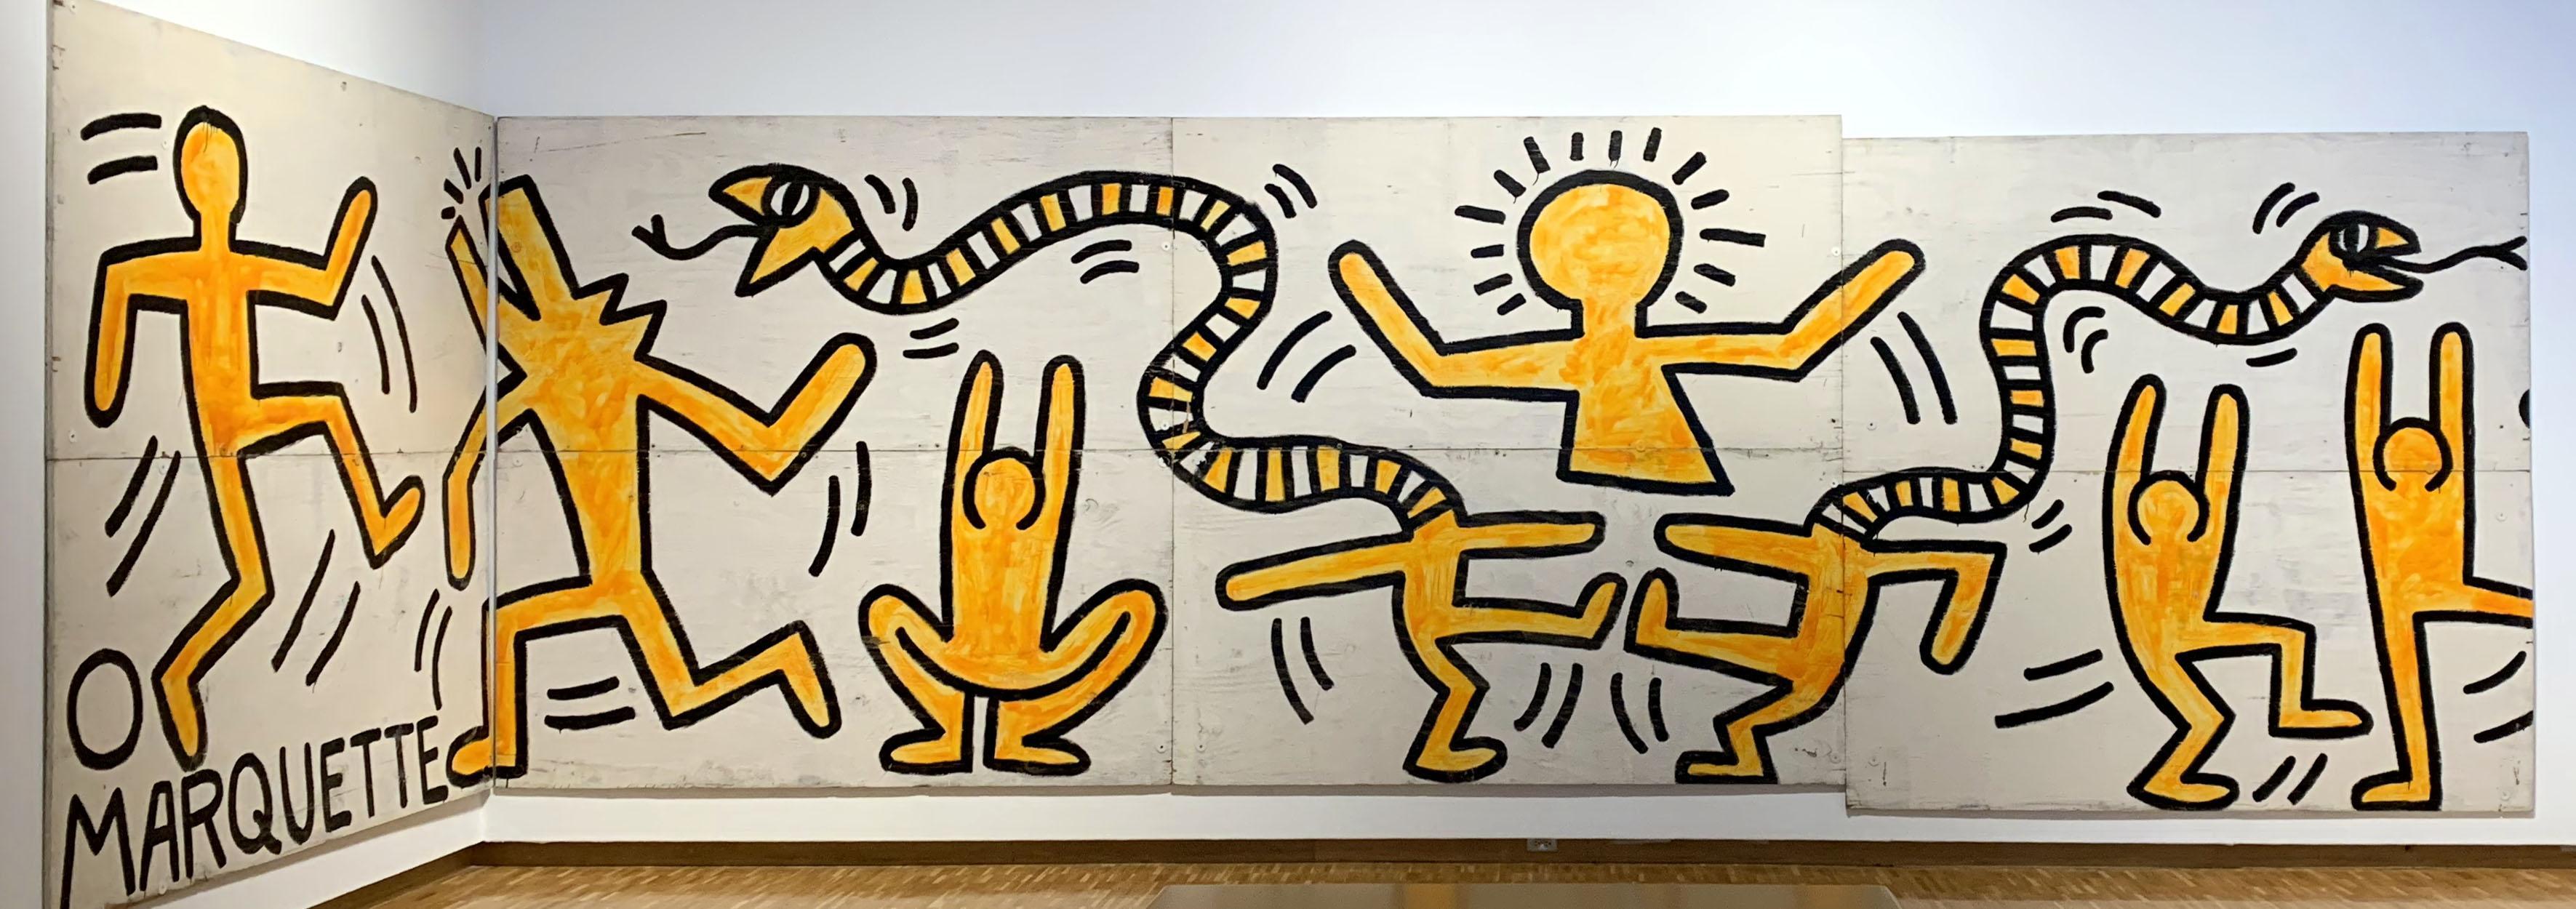 Keith Haring Construction Fence Mixed Reality Experience Haggerty Marquette University